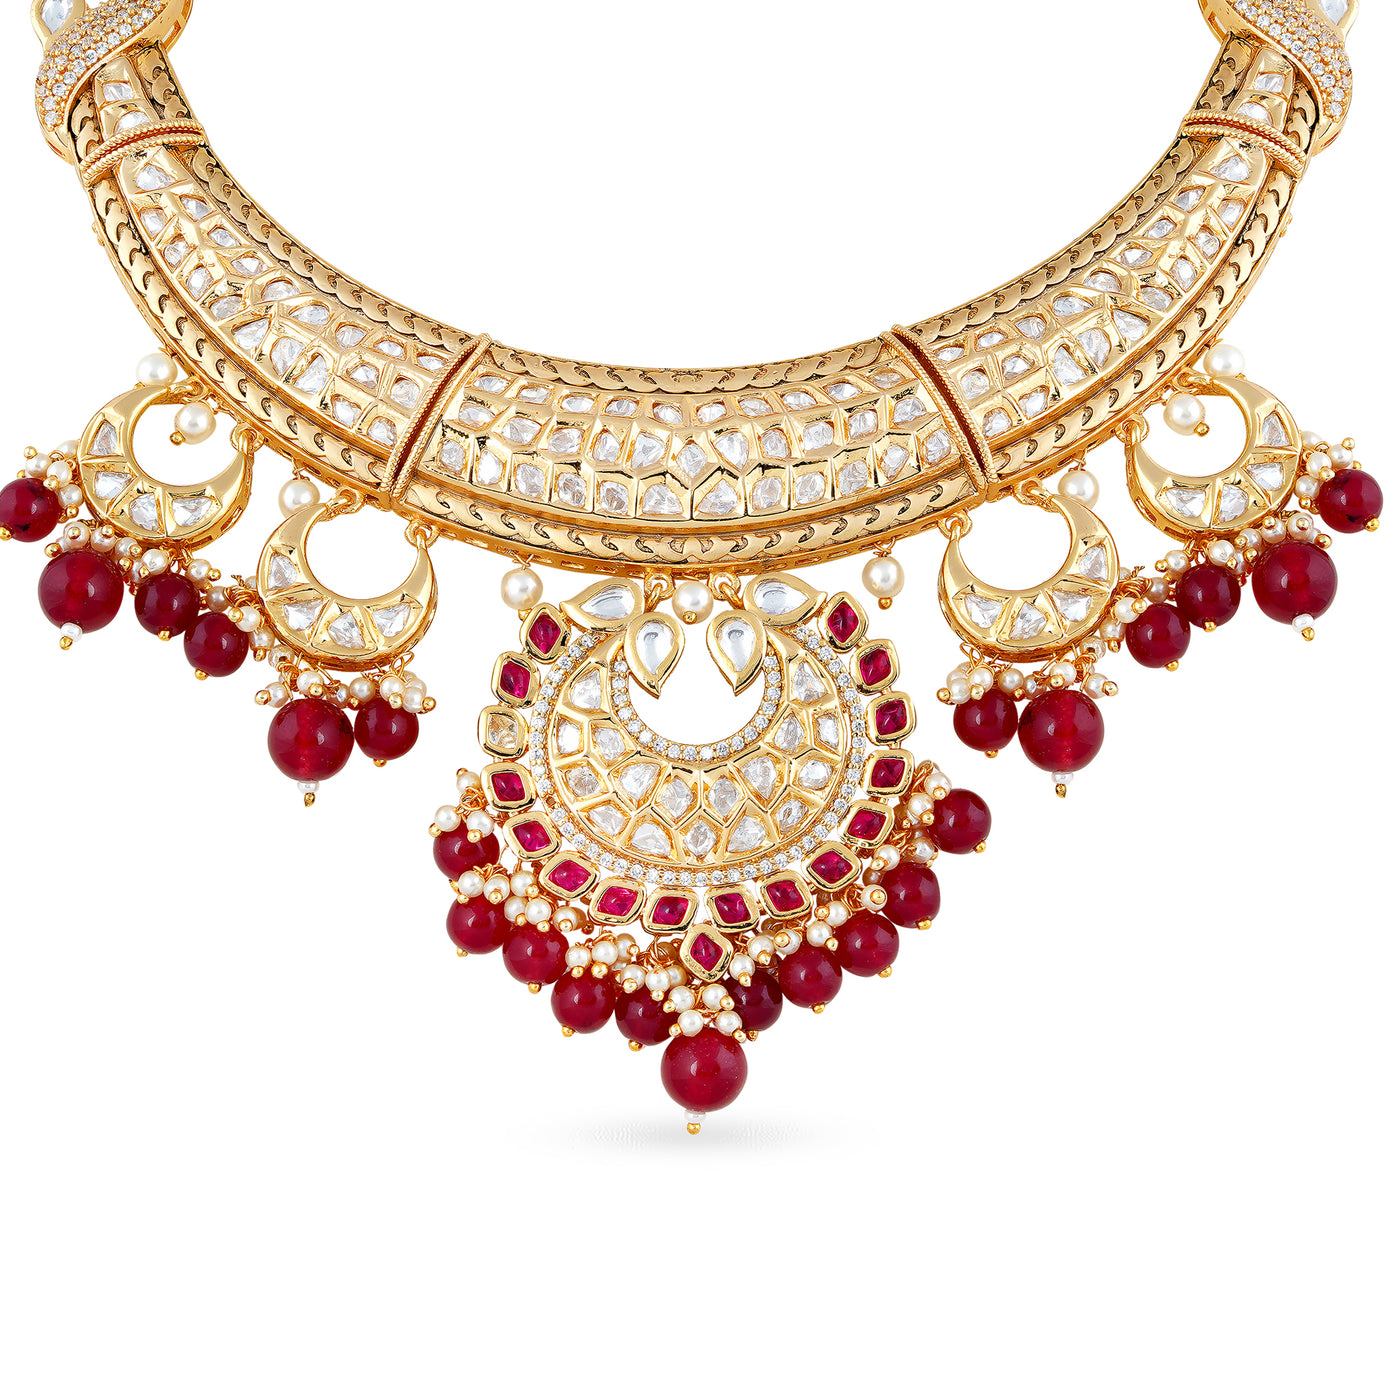 Gold plated kundan necklace set with matchng earrings and red drops.